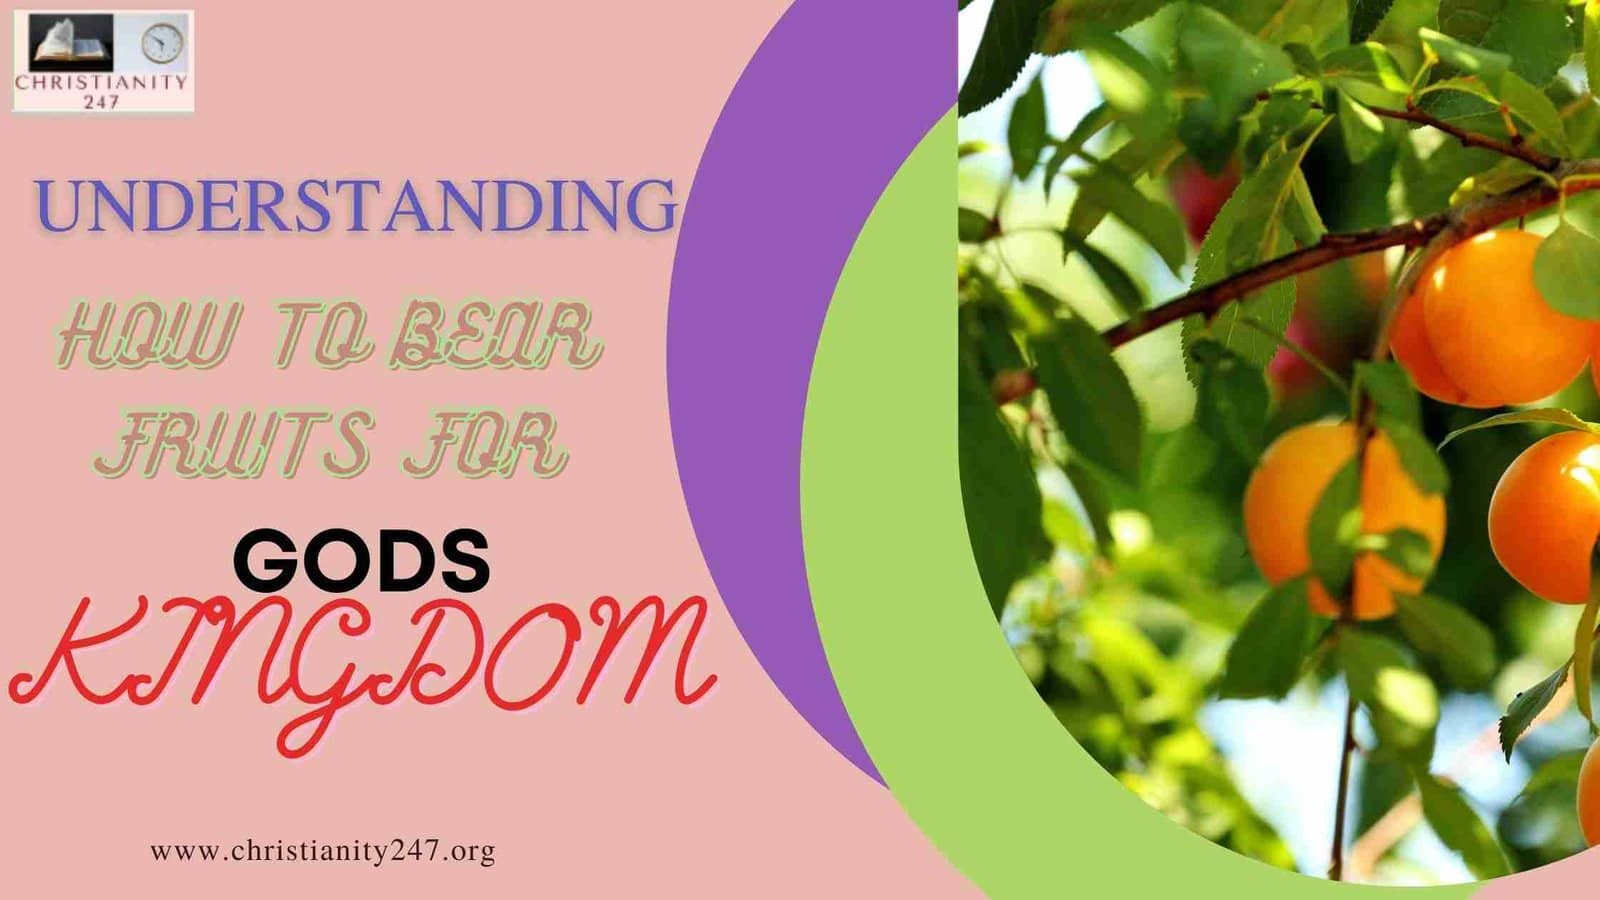 You are currently viewing UNDERSTANDING HOW TO BEAR FRUITS FOR GODS KINGDOM